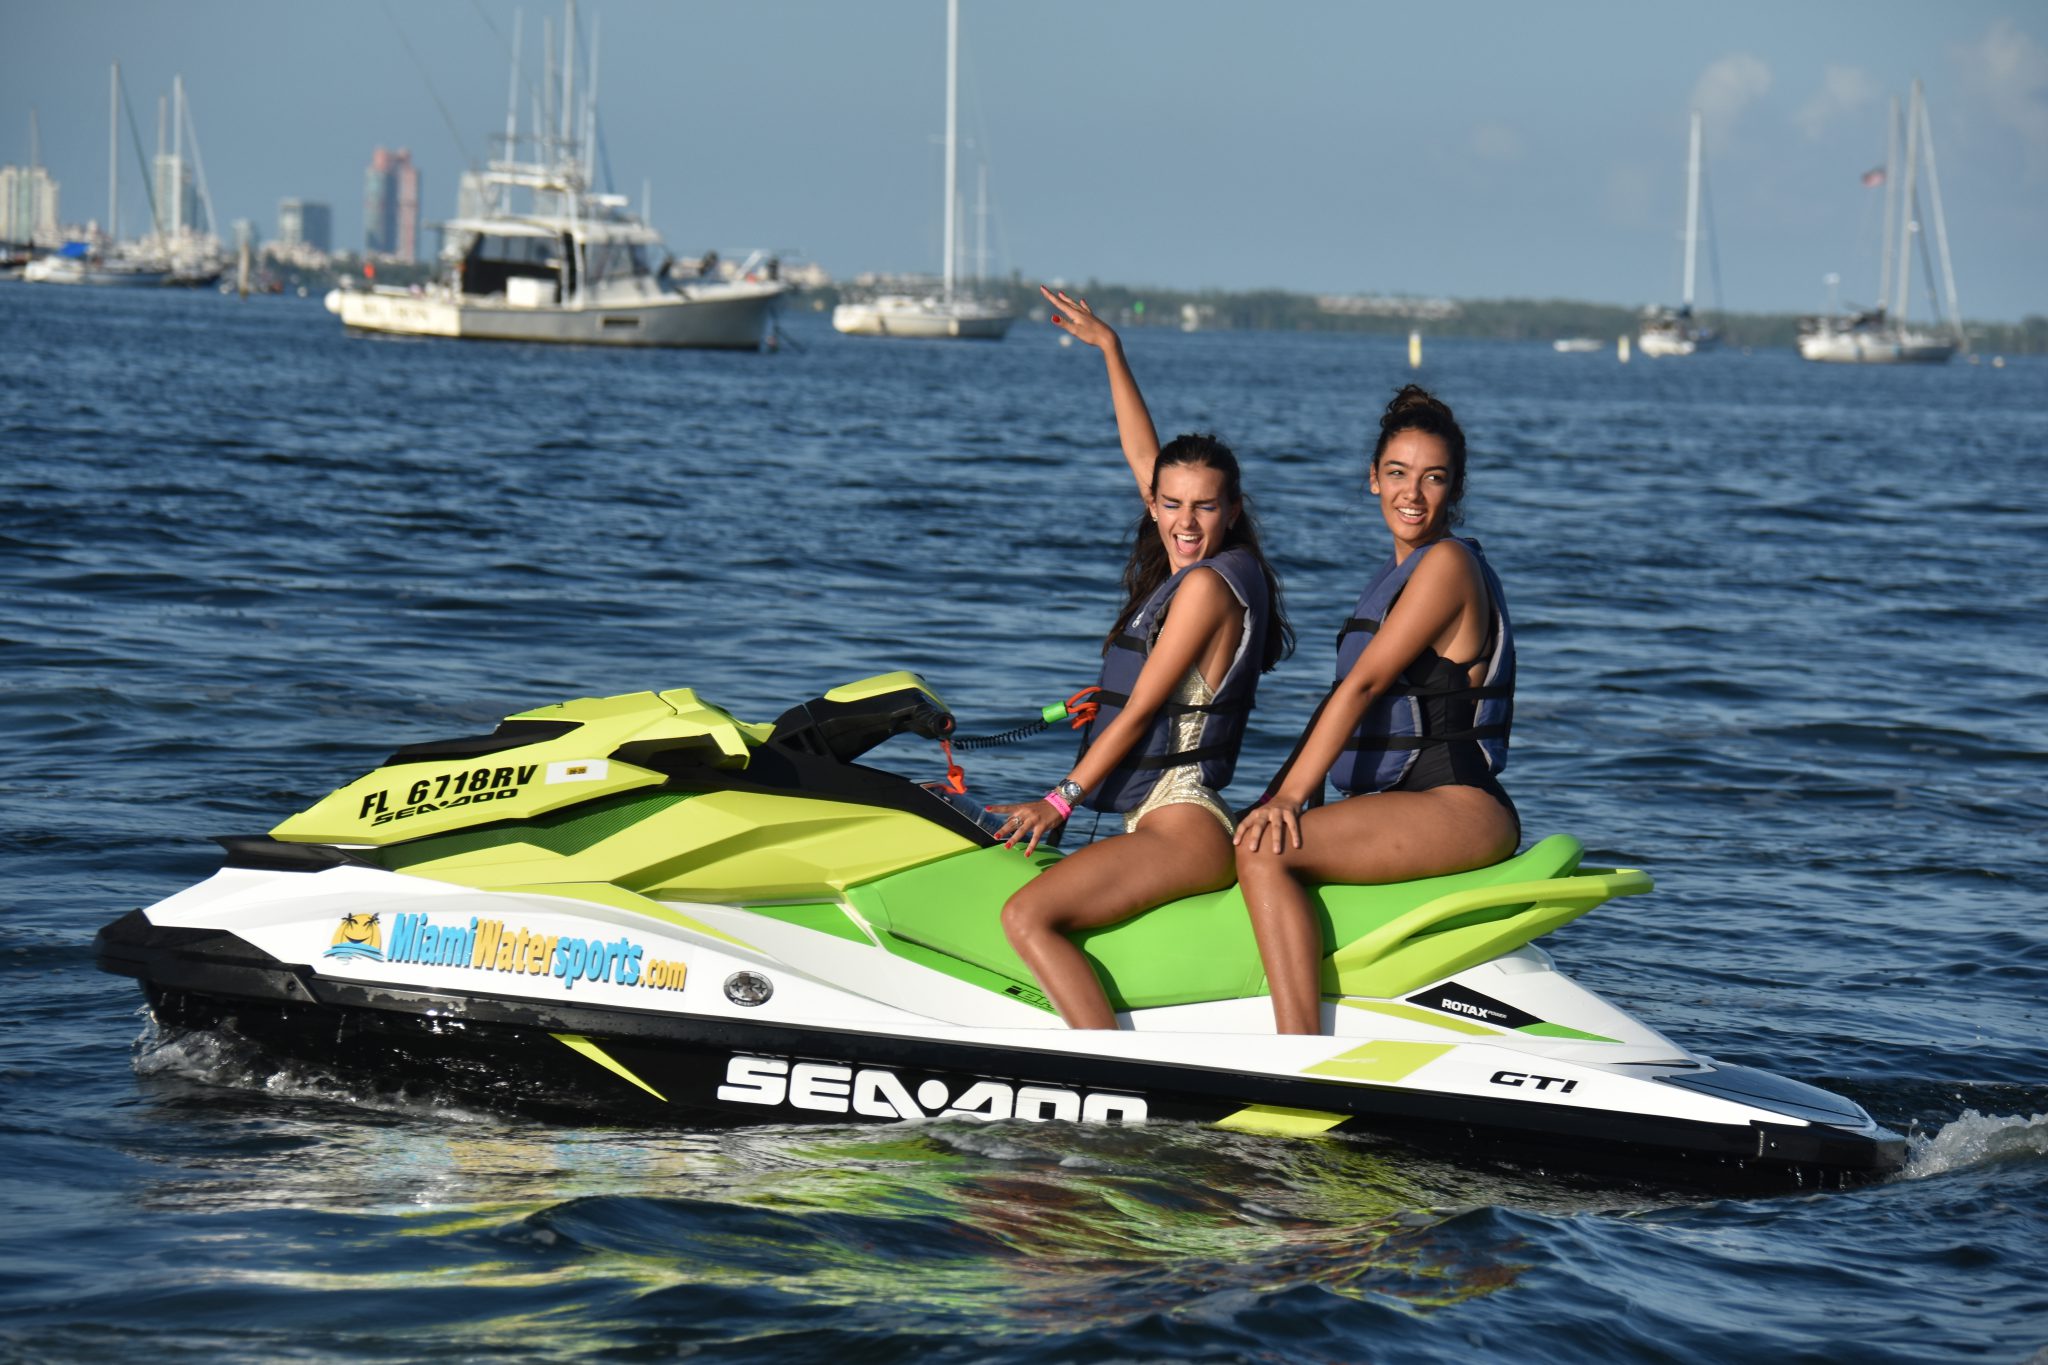 Top 5 Reasons to Rent a Jet Ski in Miami